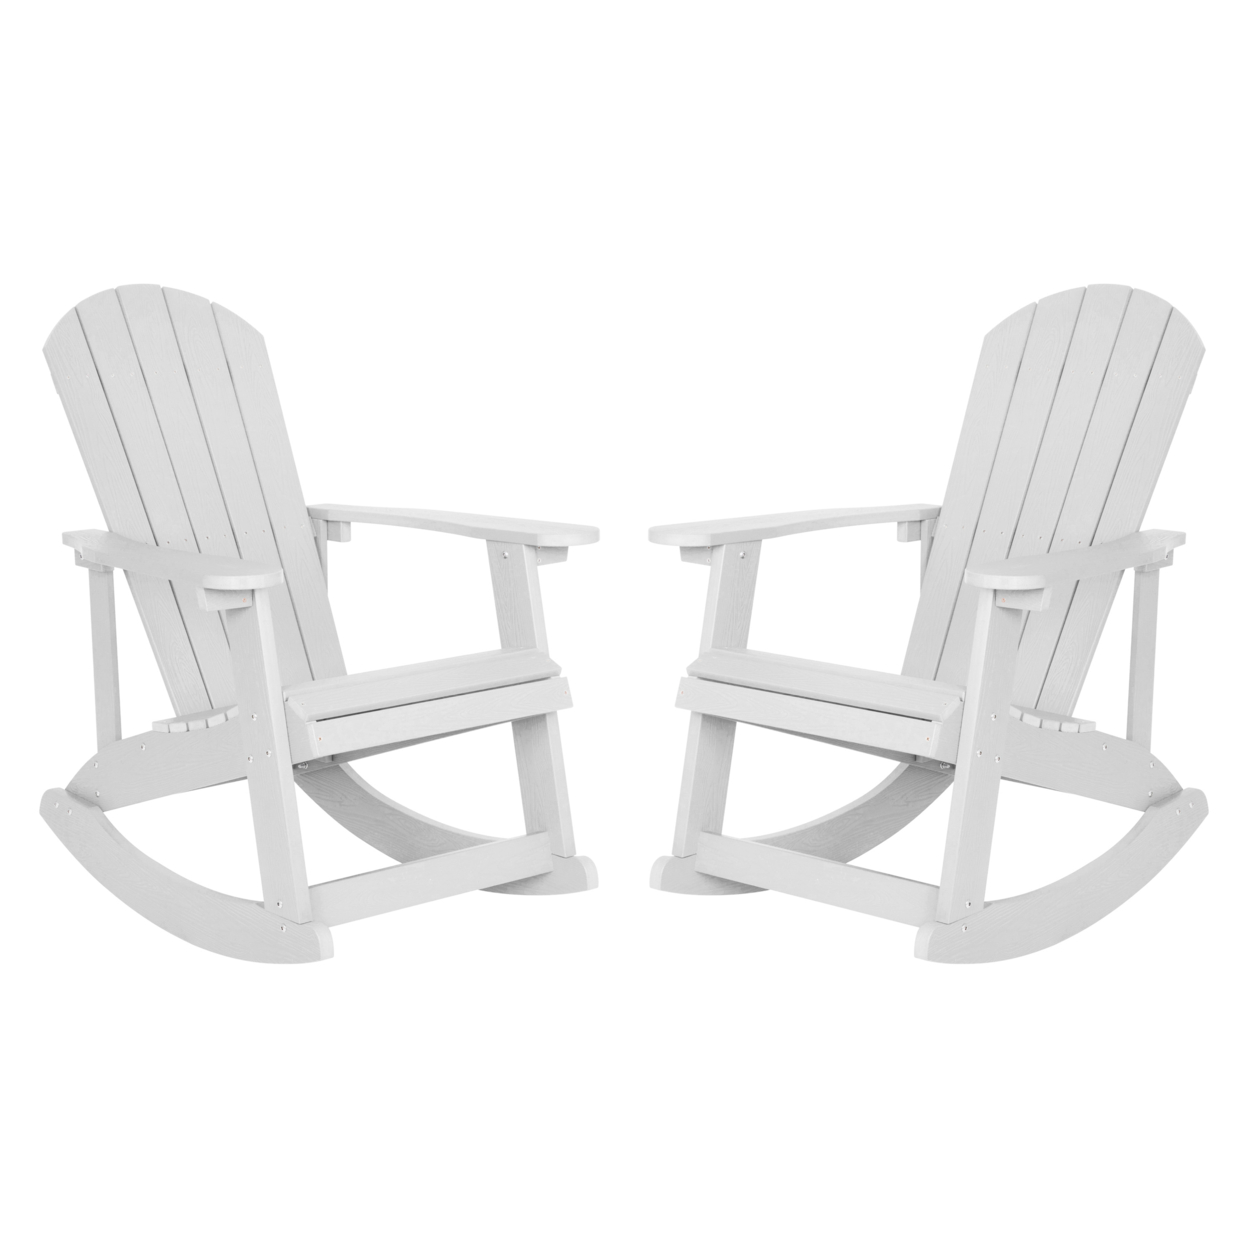 Savannah All-Weather Poly Resin Wood Adirondack Rocking Chair With Rust Resistant Stainless Steel Hardware In White - Set Of 2